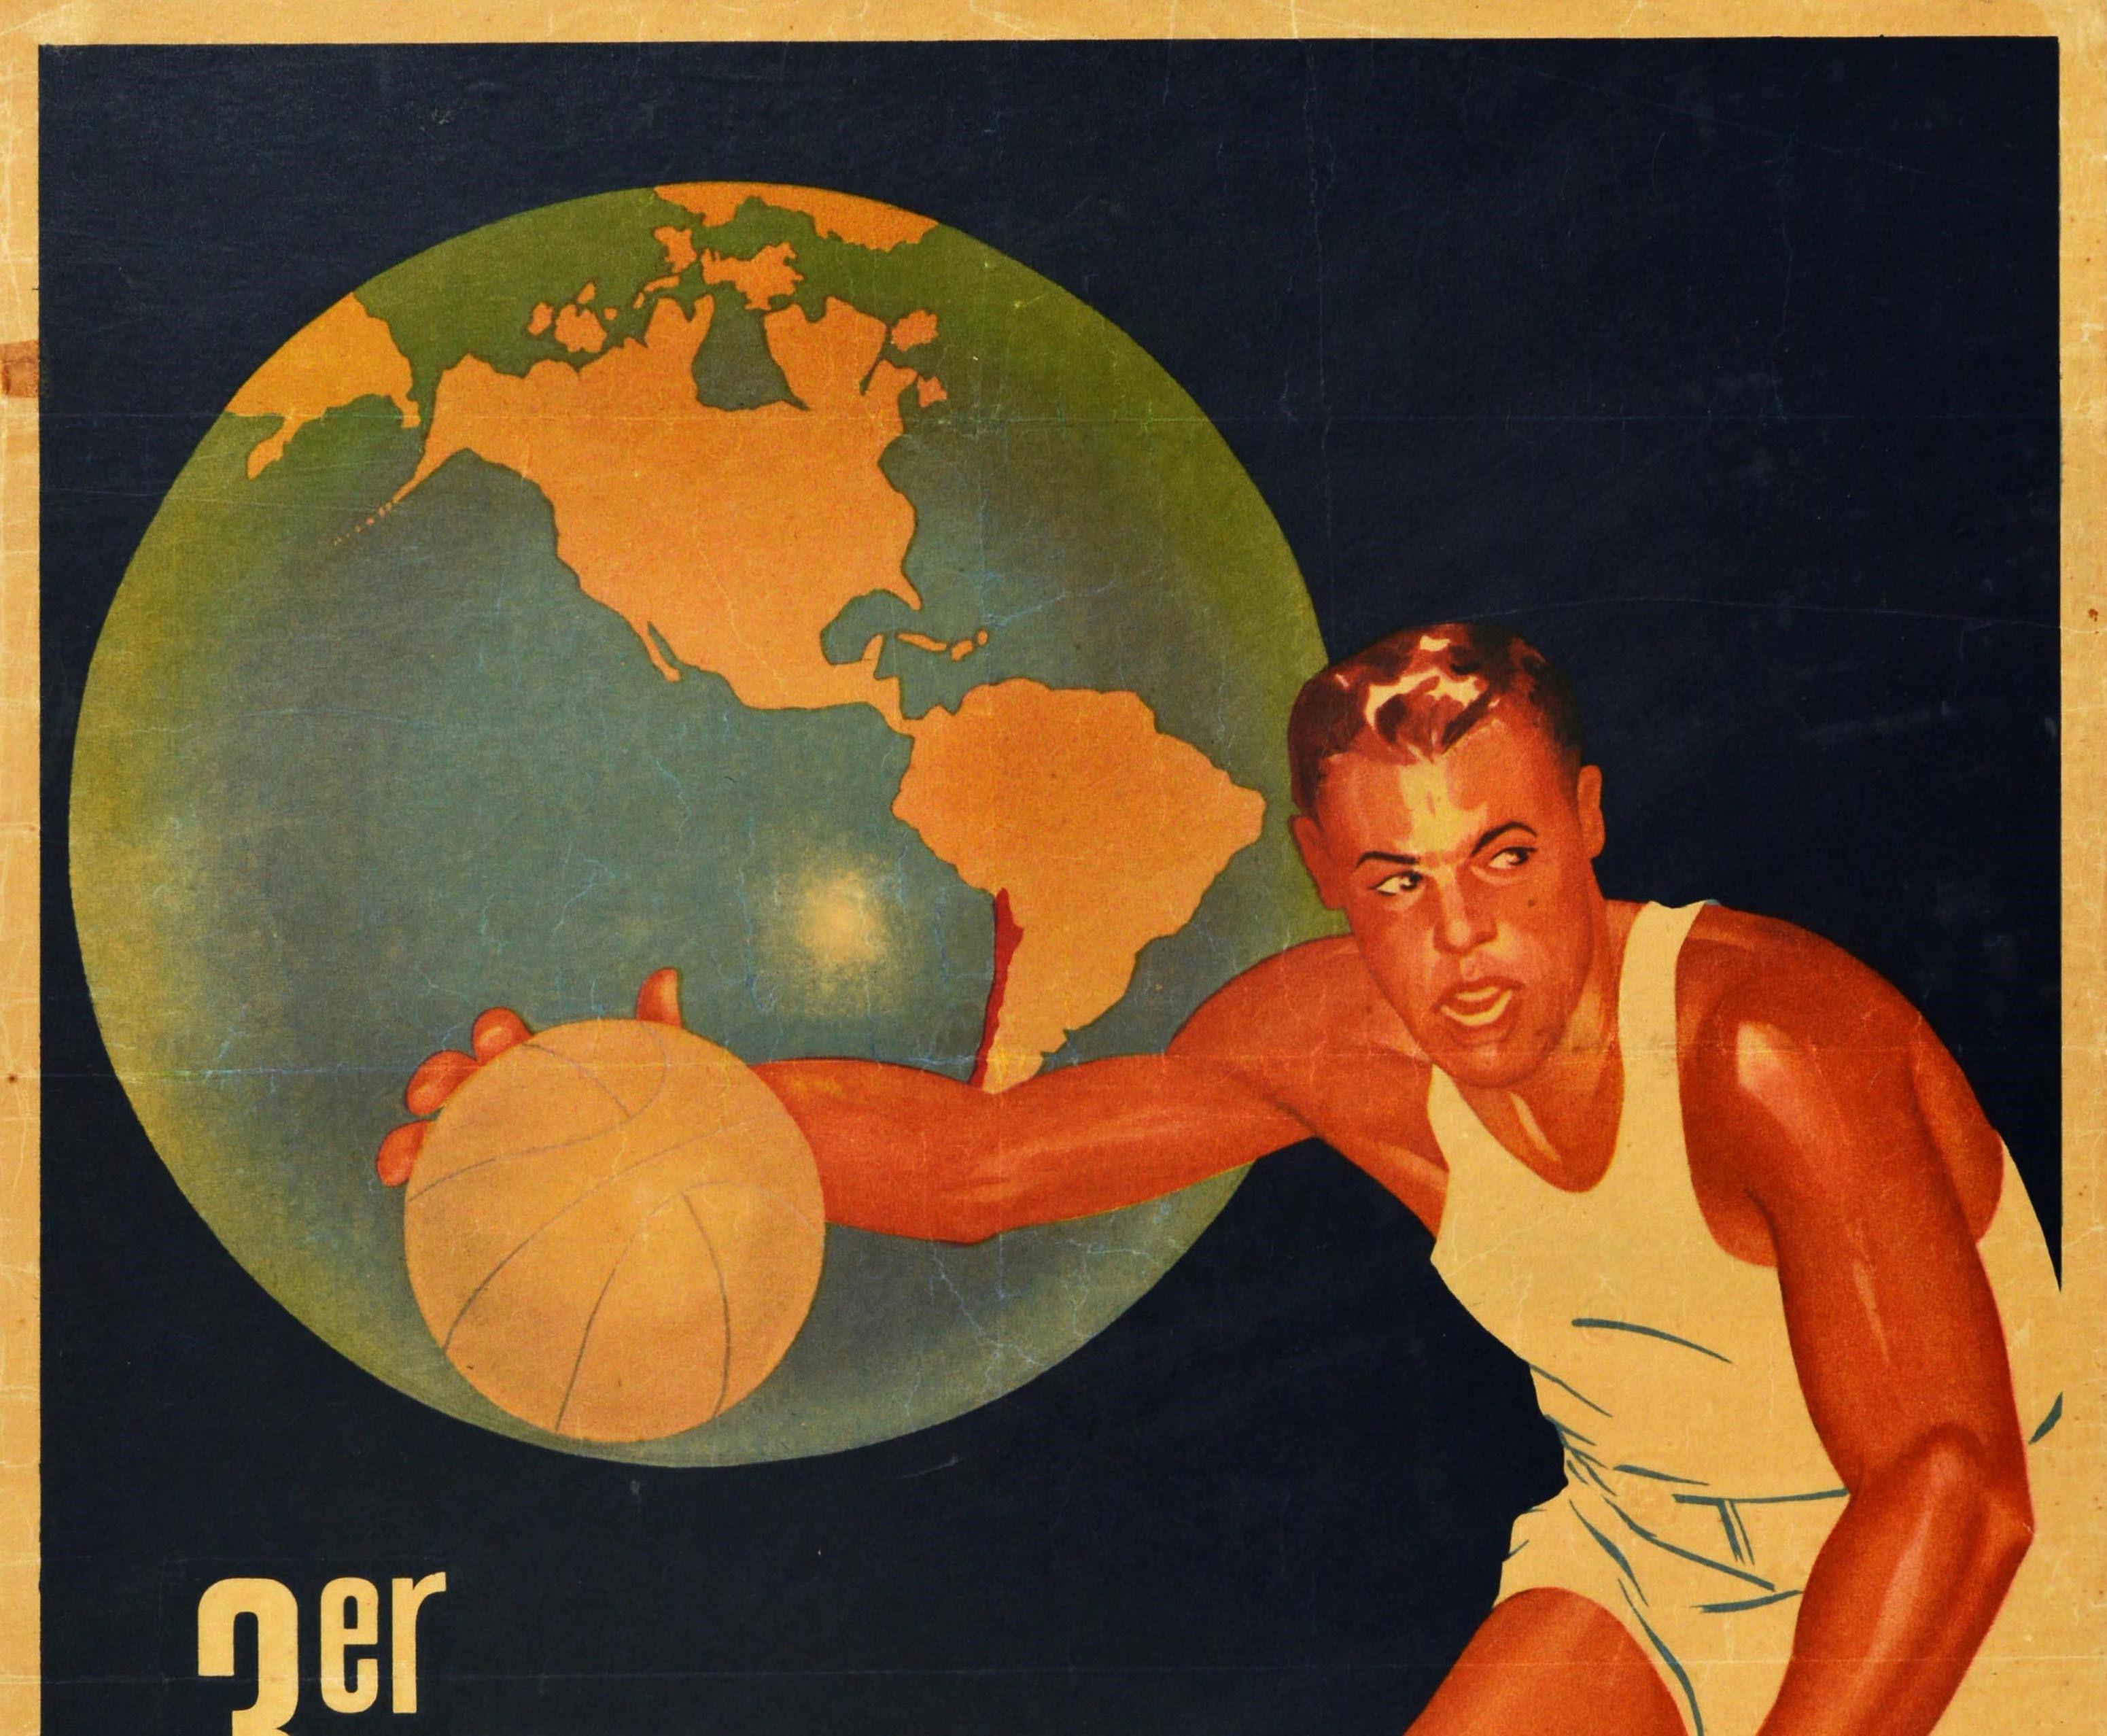 Original Vintage Sport Poster 3rd World Basketball Championship Chile Coca Cola - Print by Unknown